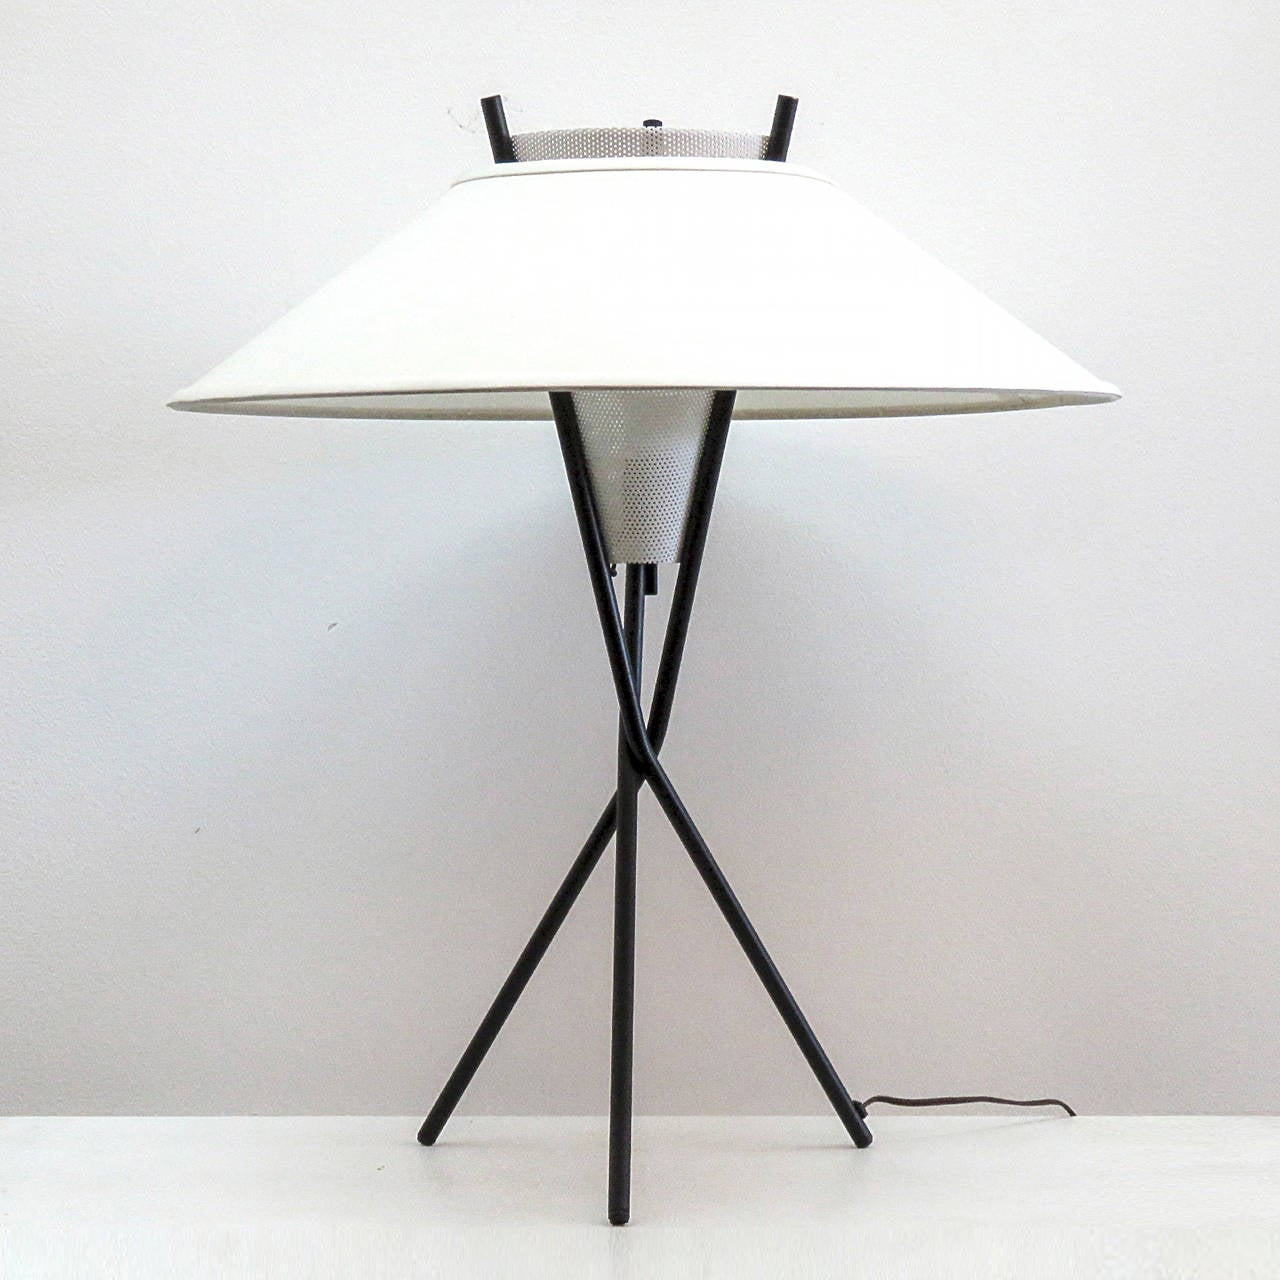 Elegant sculptural Gerald Thurston tri-pod table lamp with perforated white metal cone and custom shade, on/off switch under the center of the perforated cone.